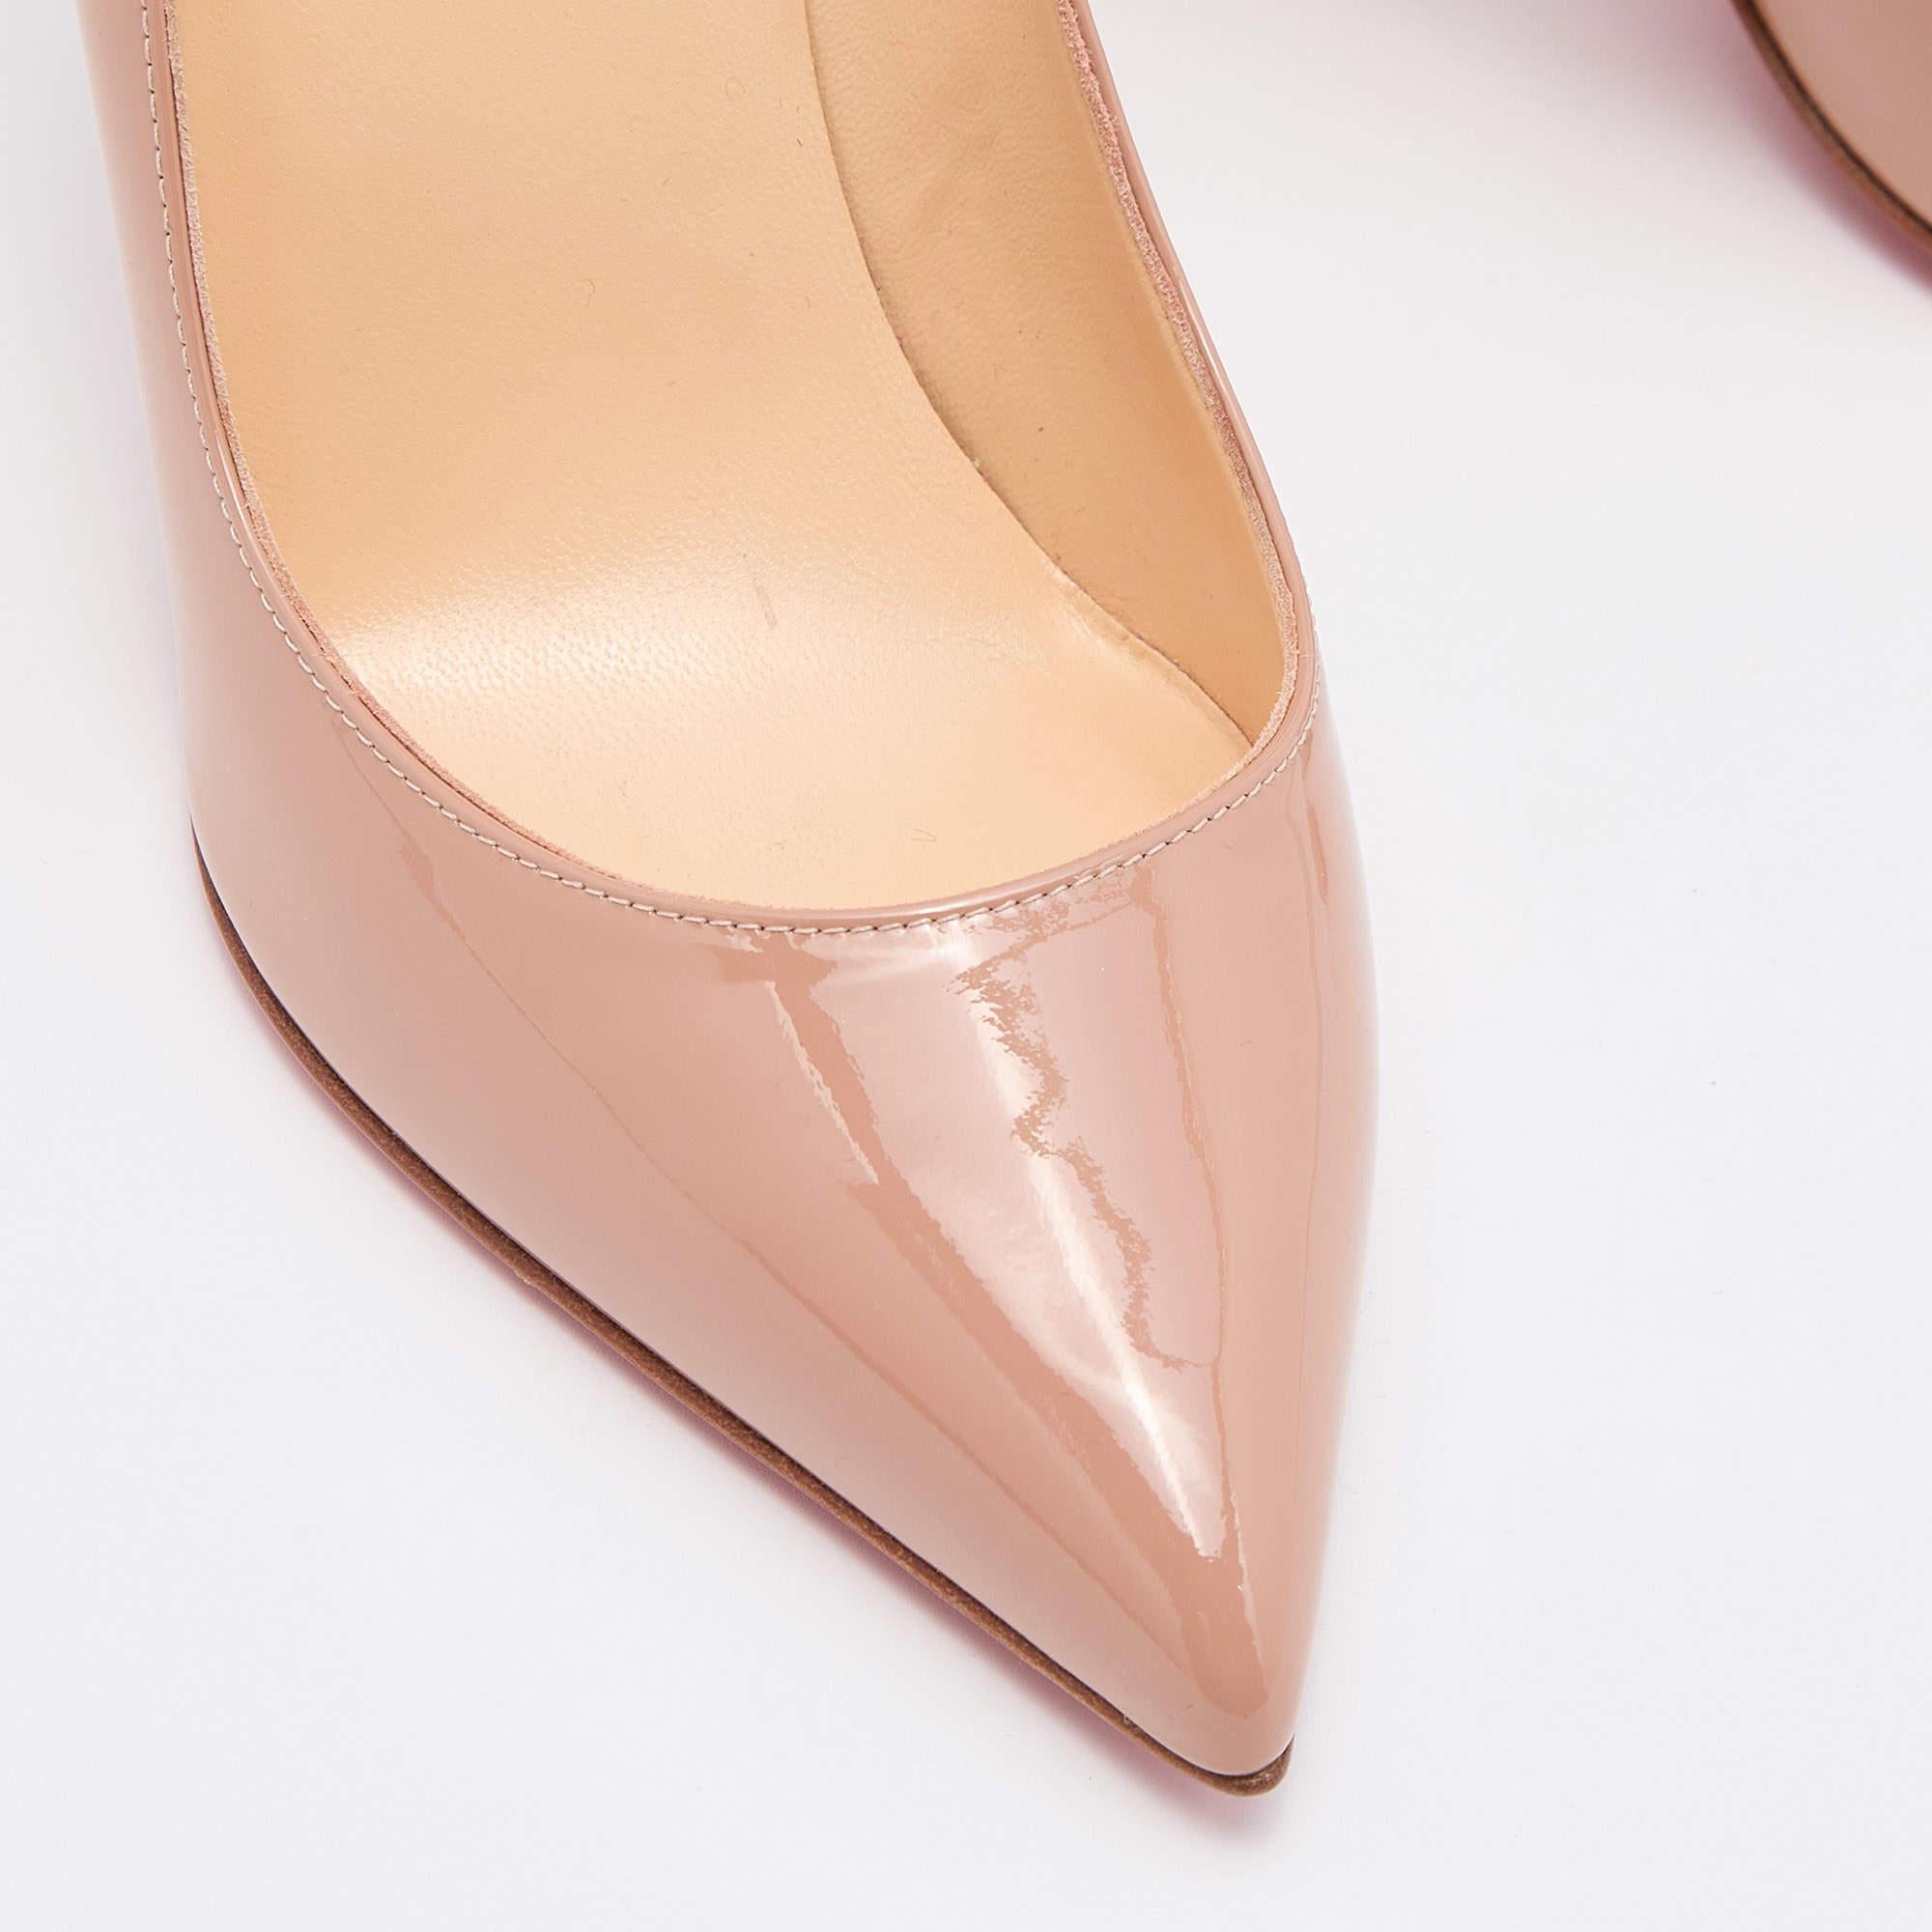 Christian Louboutin Nude Patent Leather Pigalle Pumps Size 39 2